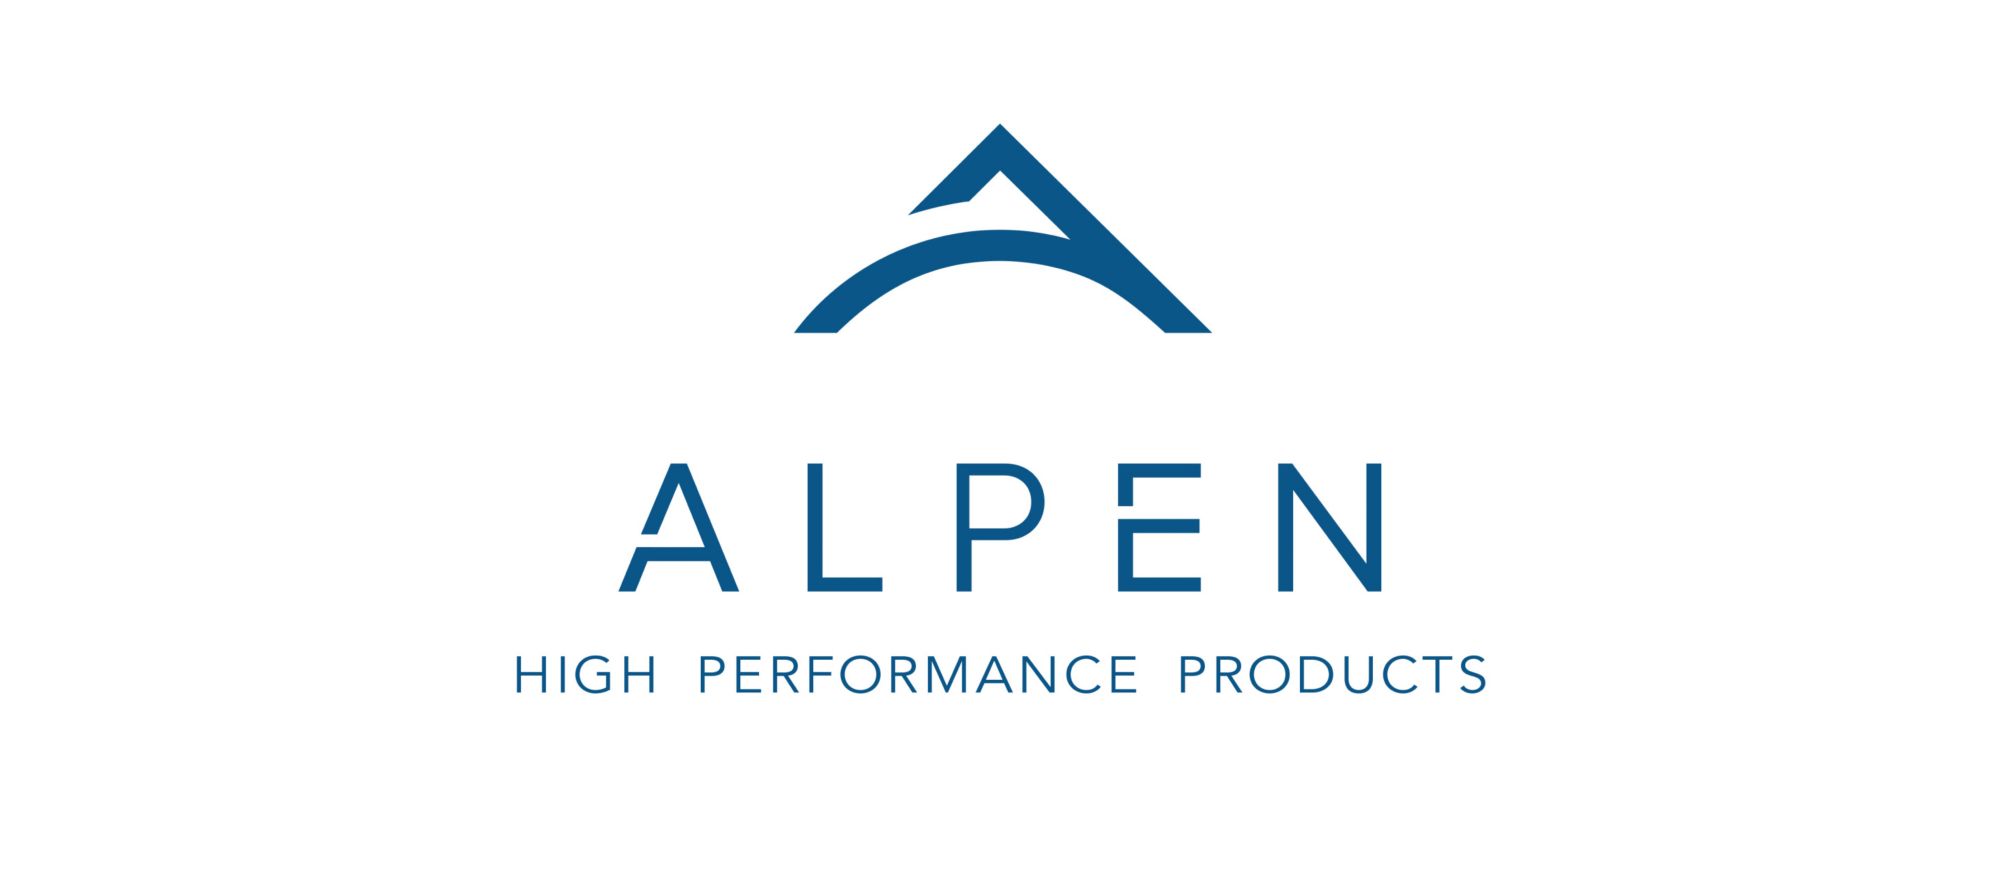 Alpen High Performance Products logo 